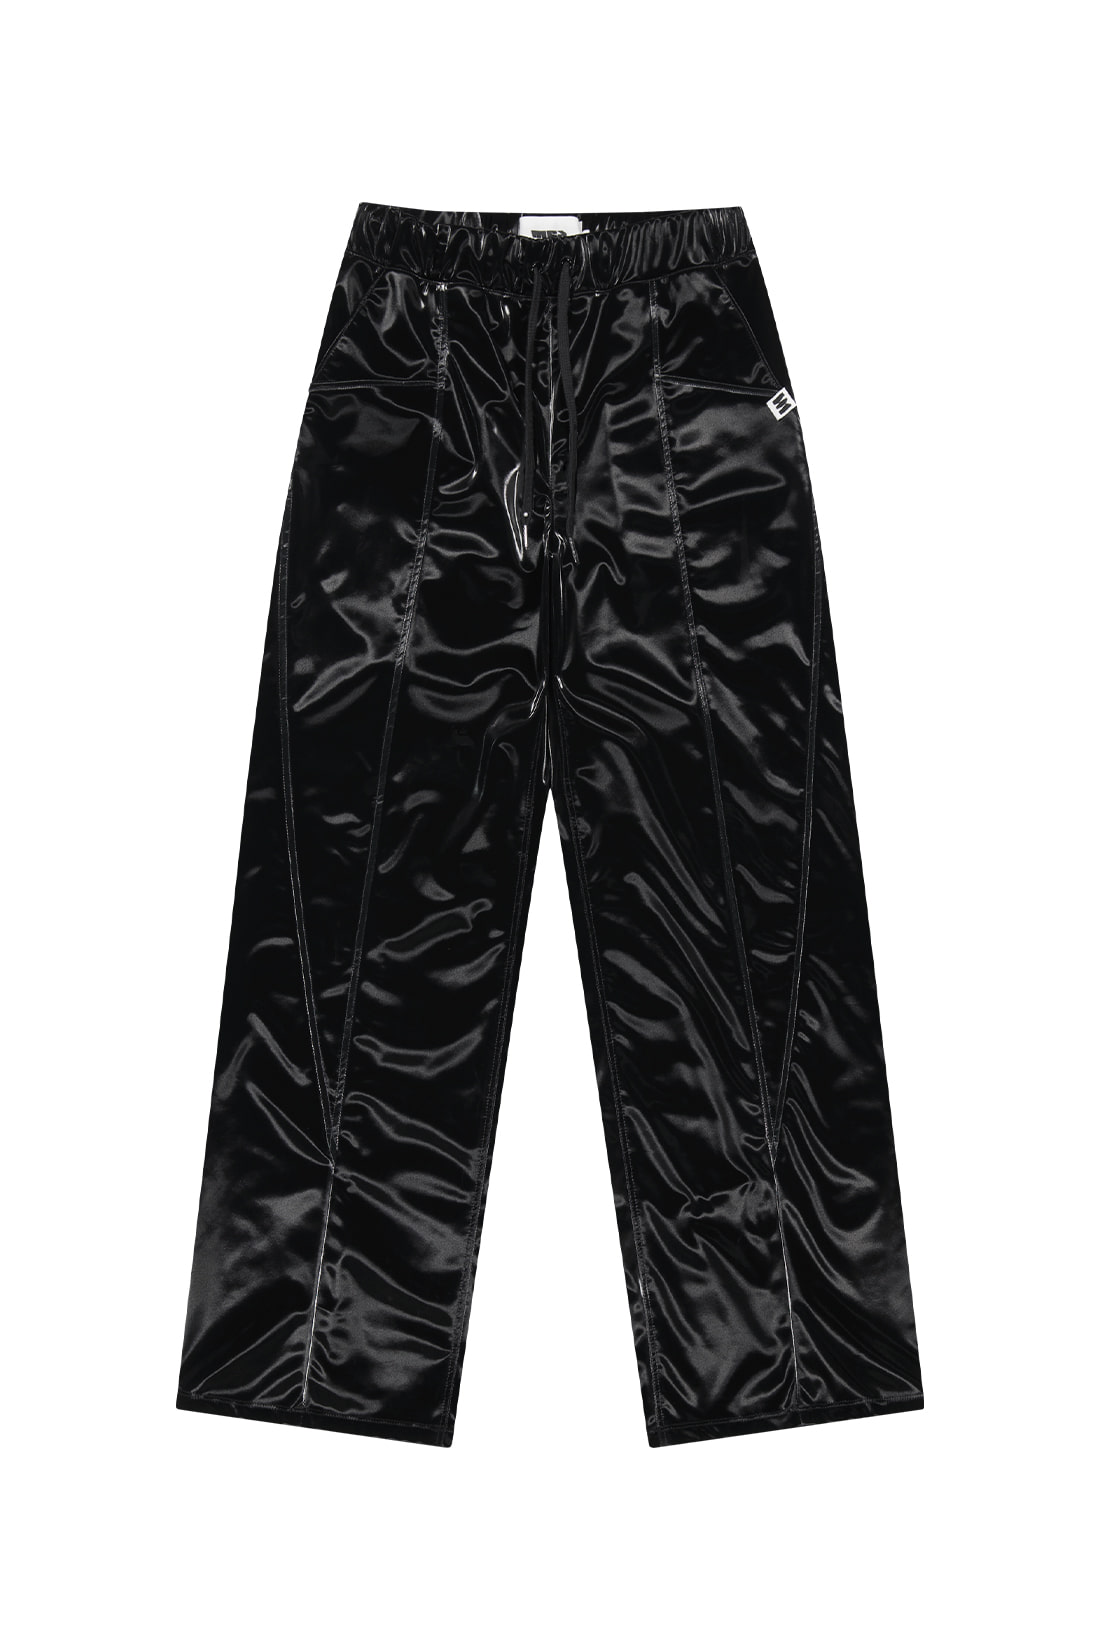 WIDE STRAIGHT FIT PANTS [BLACK]